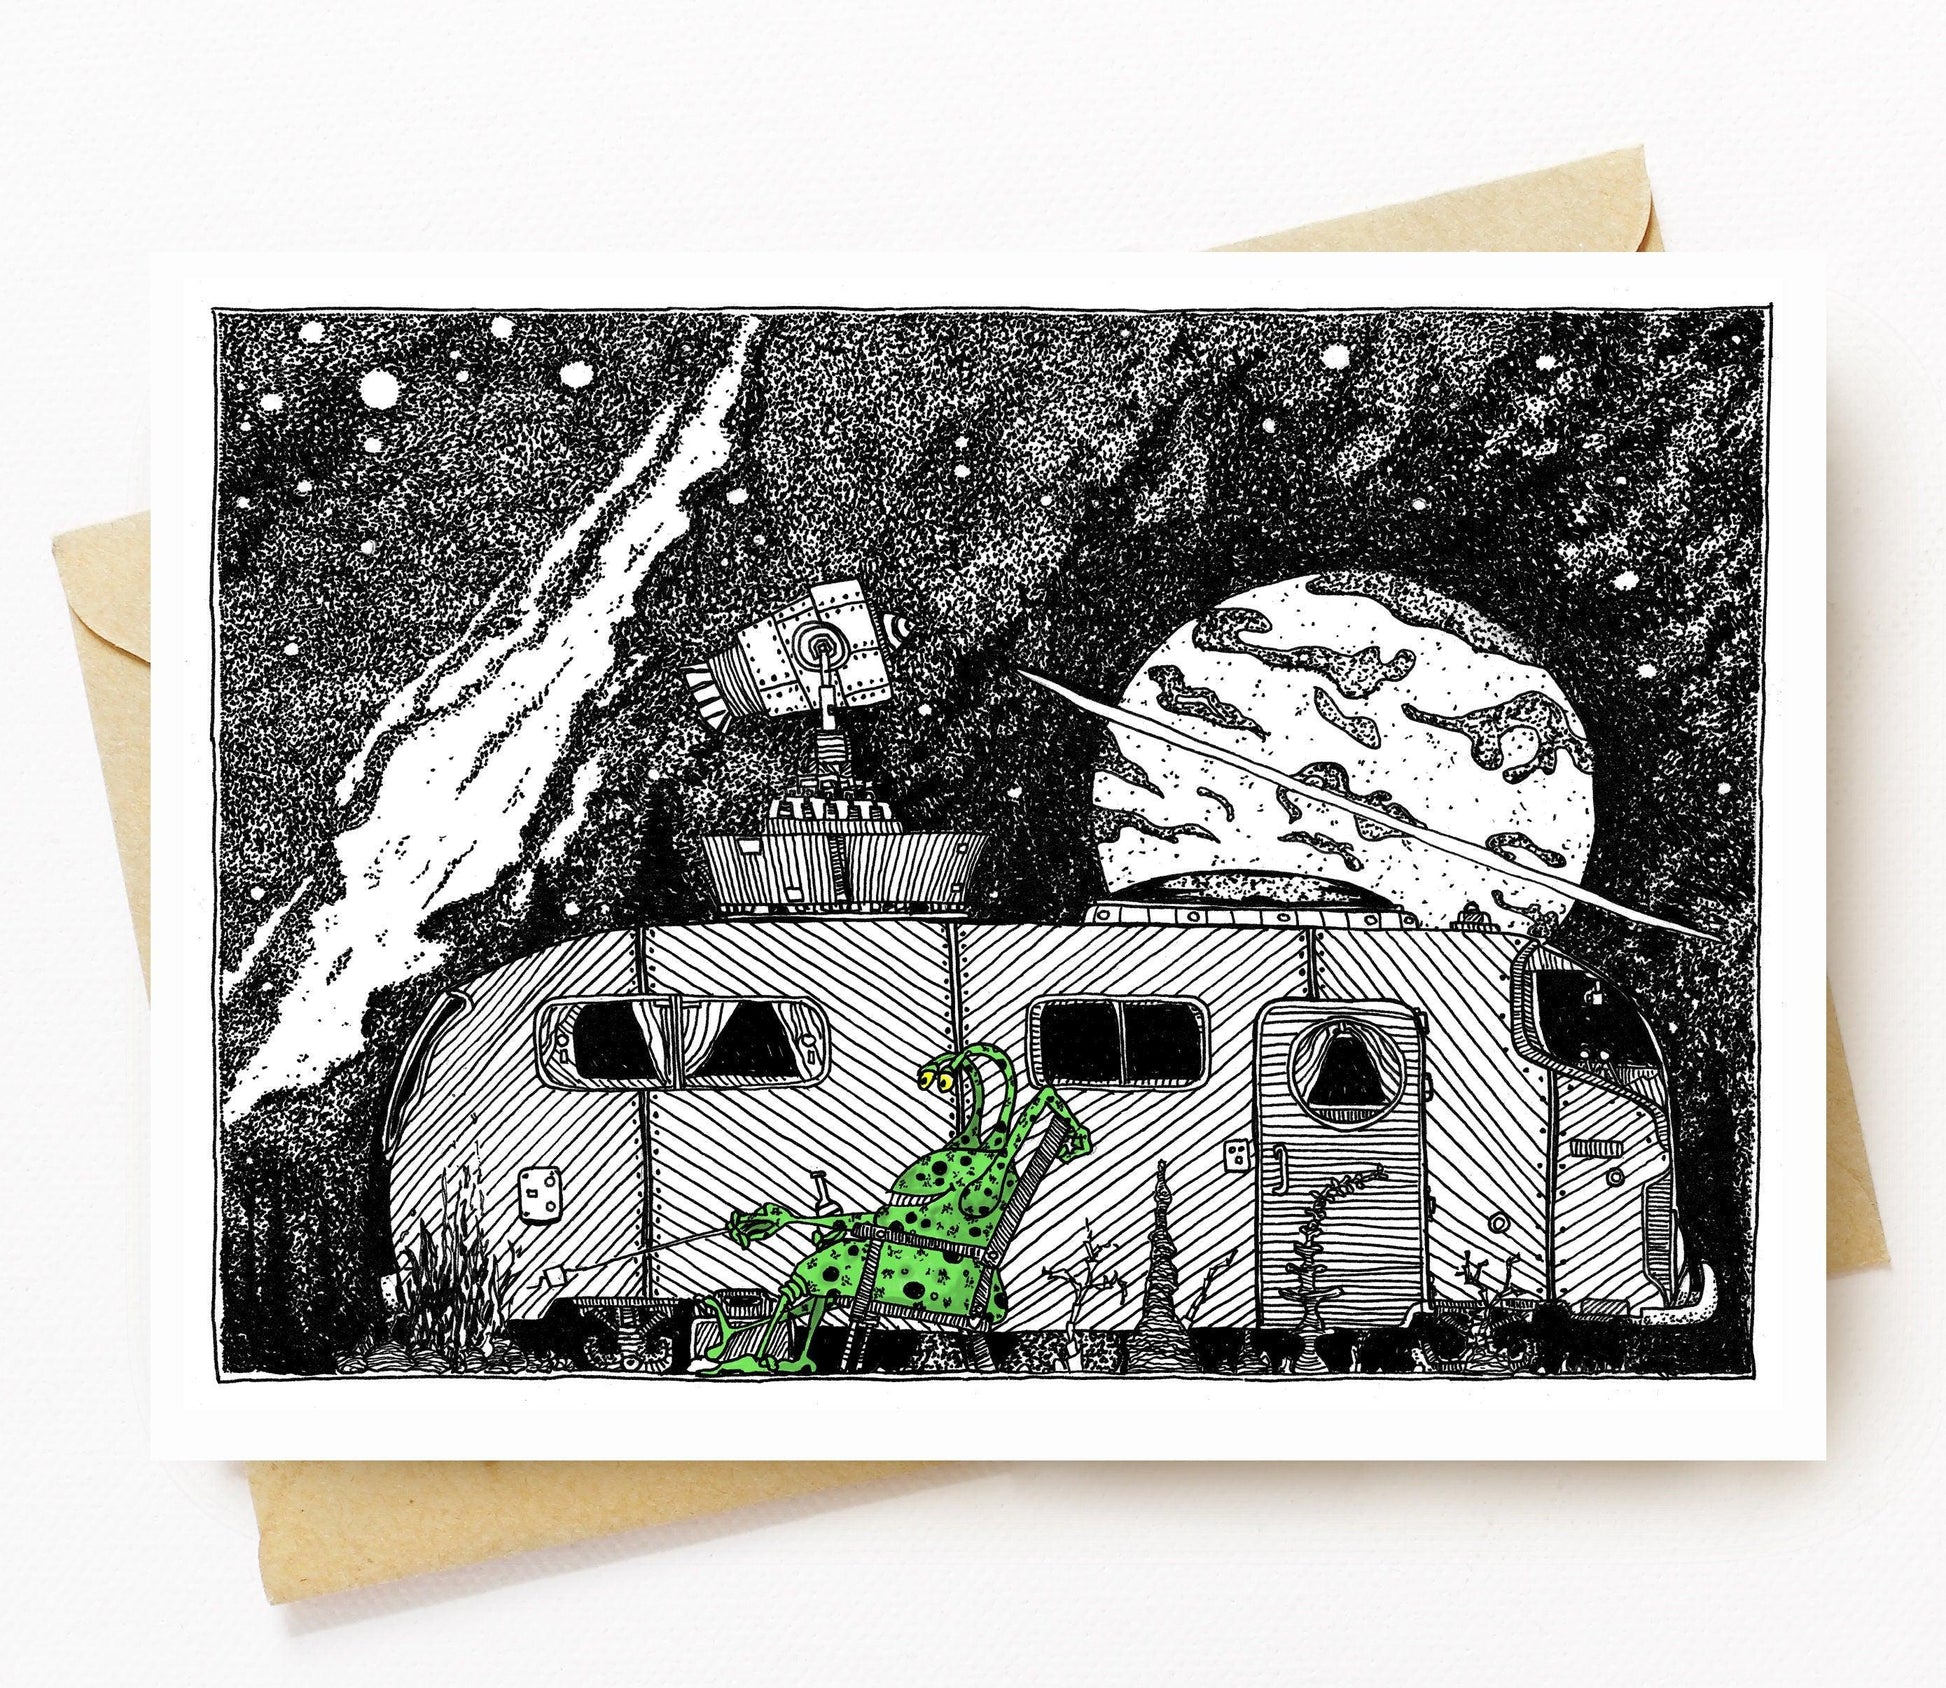 BellavanceInk: Greeting Card With An Alien And His UFO Camper on Holiday Vacation 5 x 7 Inches - BellavanceInk